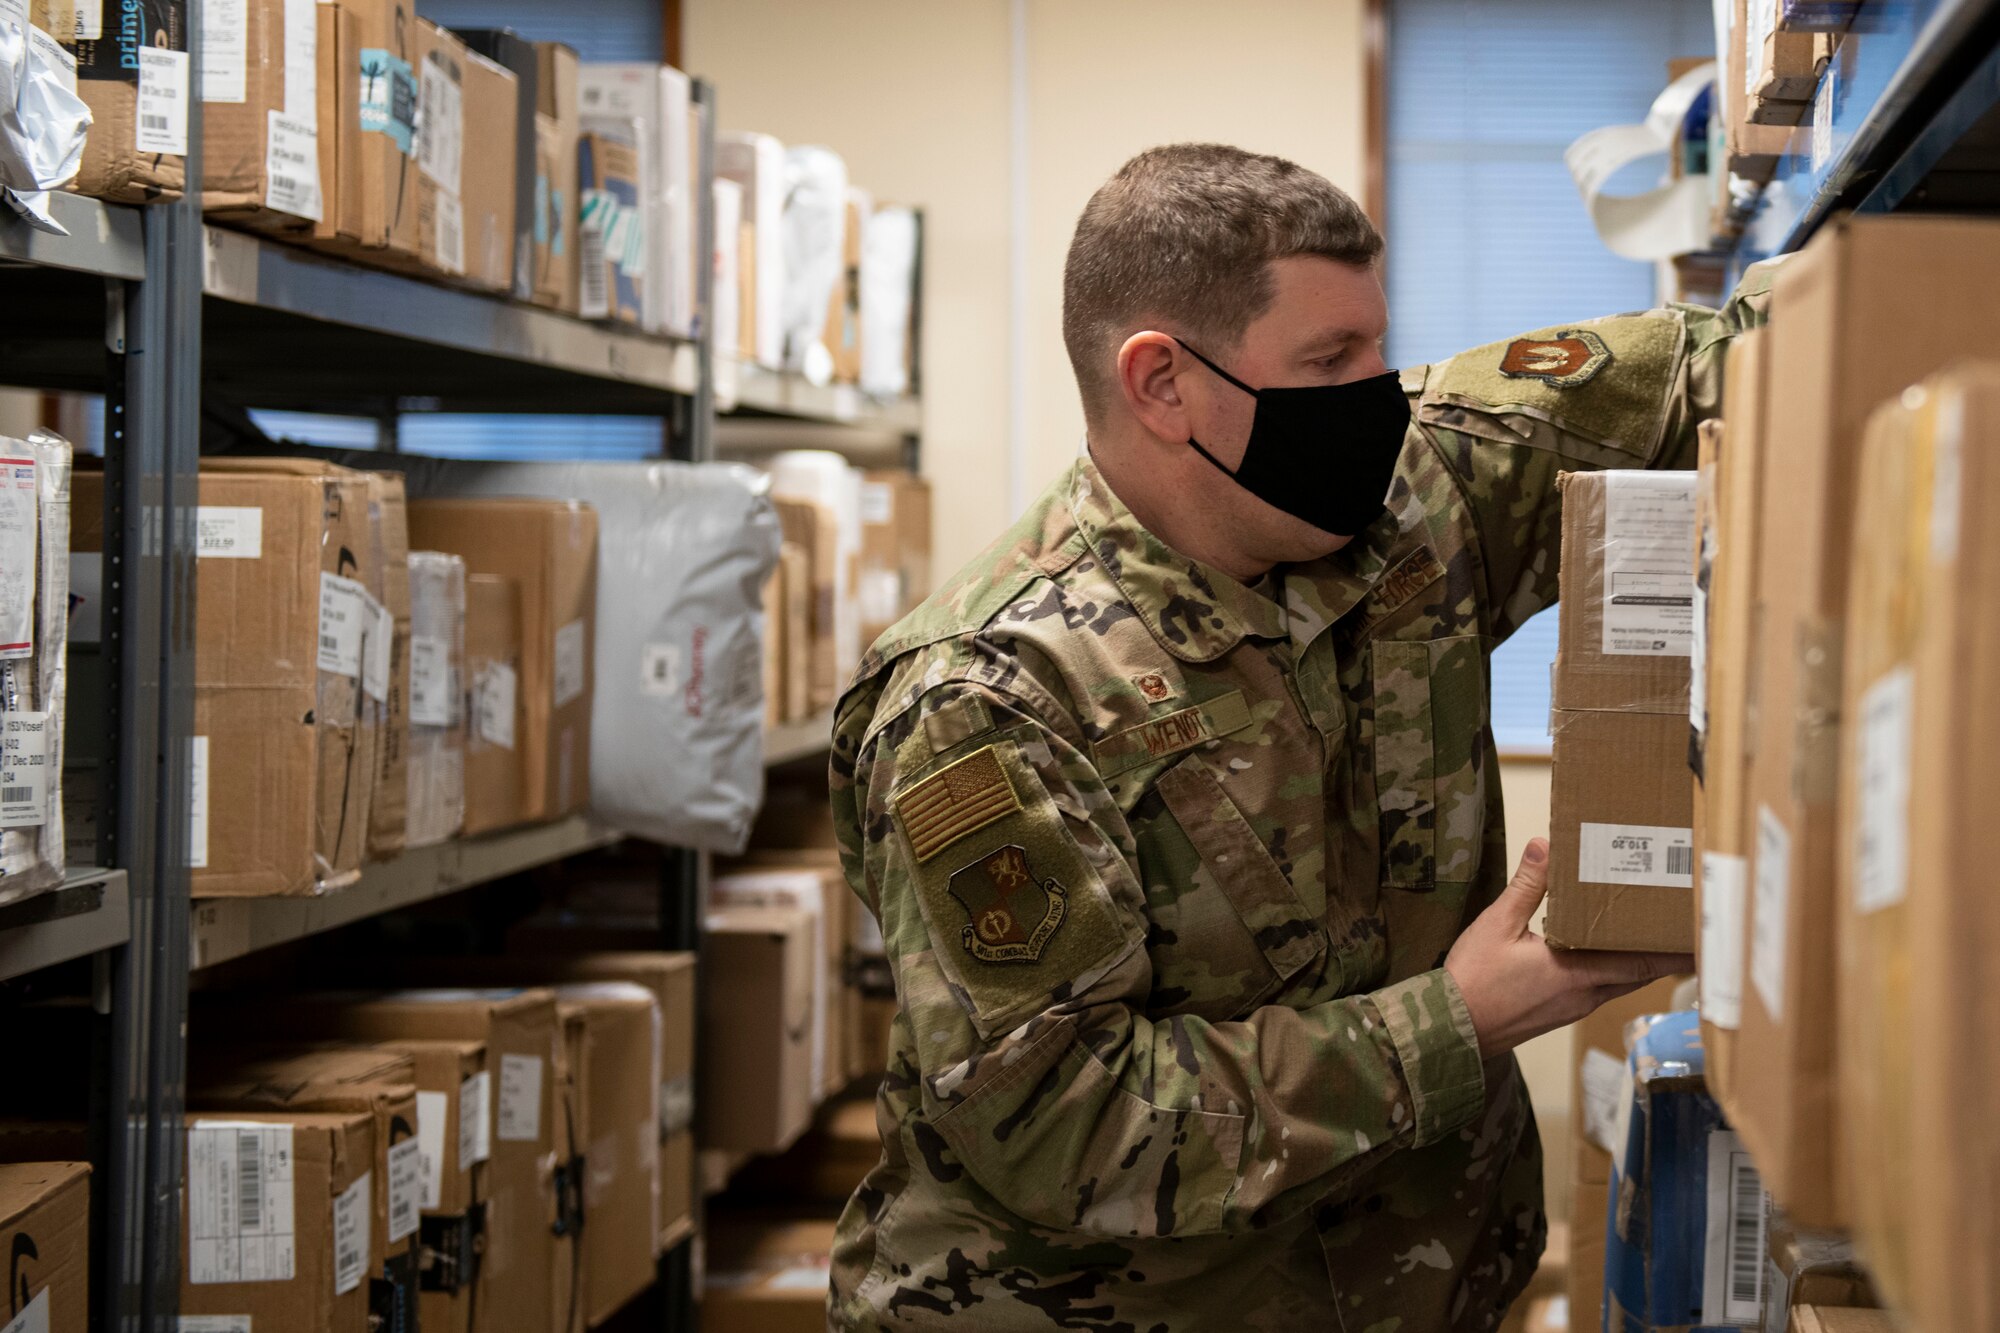 U.S. Air Force Col. Kurt Wendt, 501st Combat Support Wing commander, retrieves a package for a customer at the Royal Air Force Molesworth Post Office, England, Dec. 9, 2020. Airmen and civilians have volunteered at the post office to help with the influx of packages during the holiday season. (U.S. Air Force photo by Senior Airman Jennifer Zima)